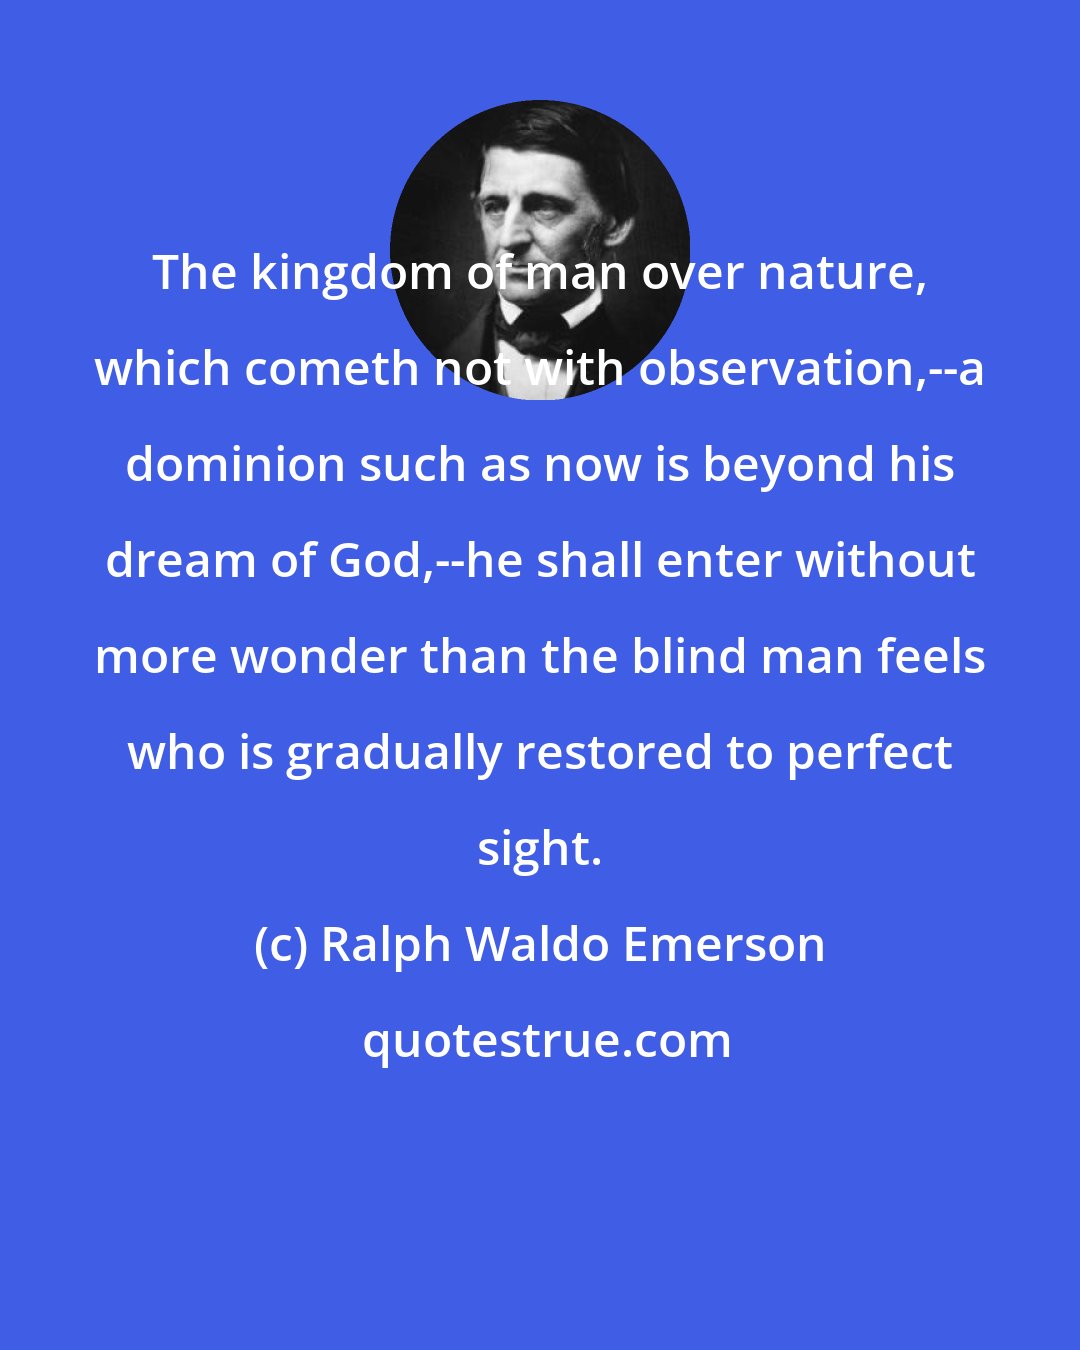 Ralph Waldo Emerson: The kingdom of man over nature, which cometh not with observation,--a dominion such as now is beyond his dream of God,--he shall enter without more wonder than the blind man feels who is gradually restored to perfect sight.